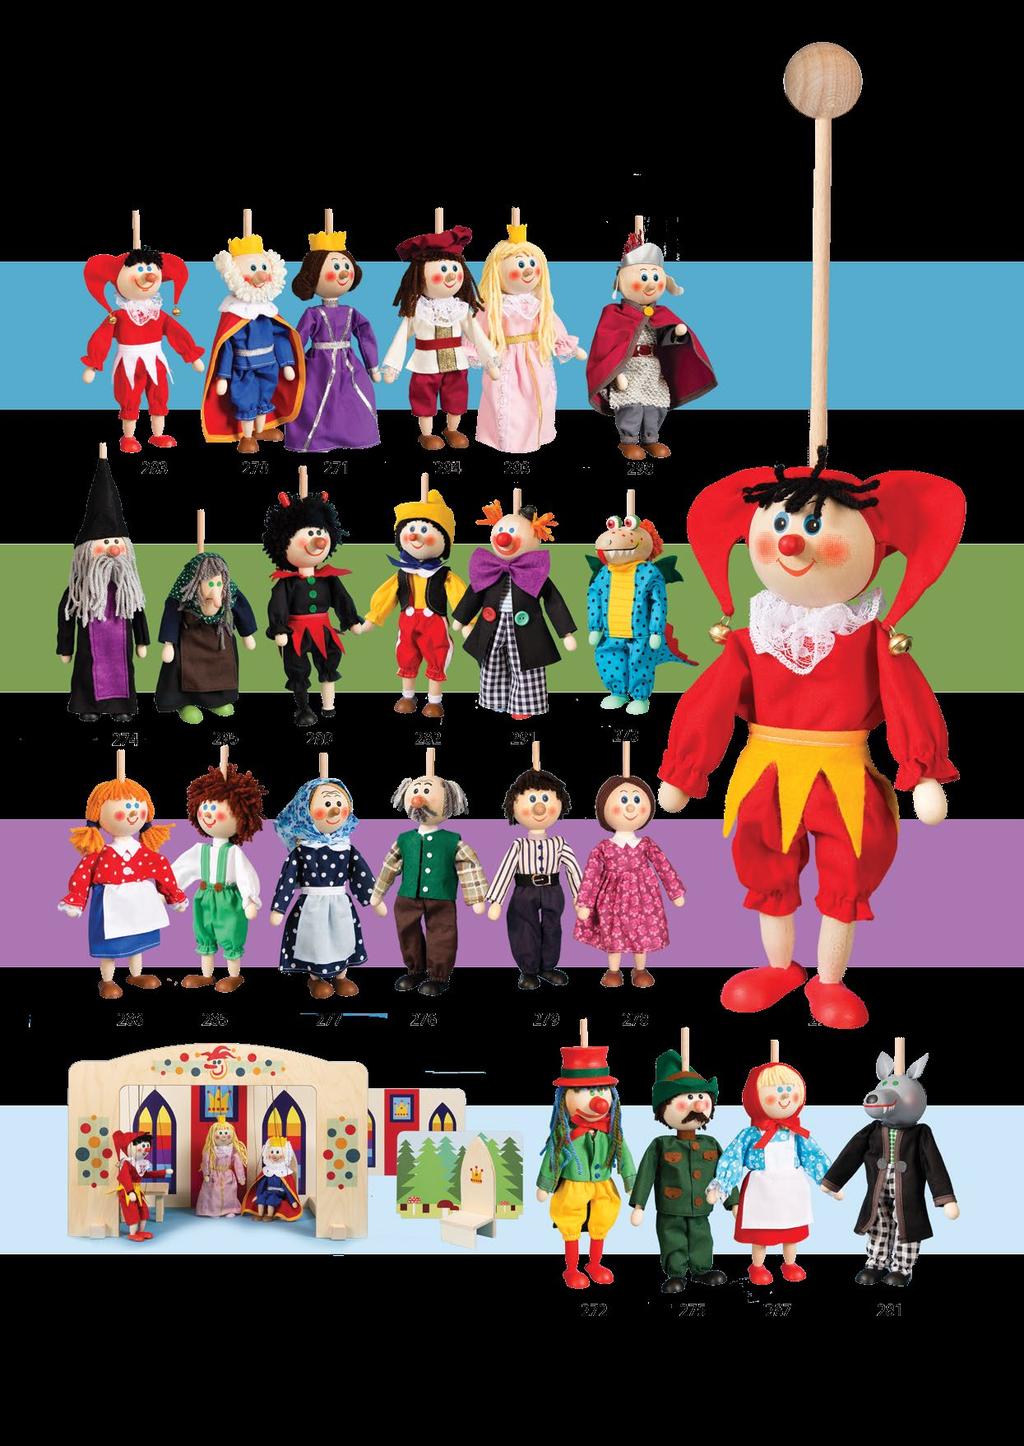 PUPPETS WITHOUT STRINGS Puppet theatre for 20 cm sizepuppets - 62